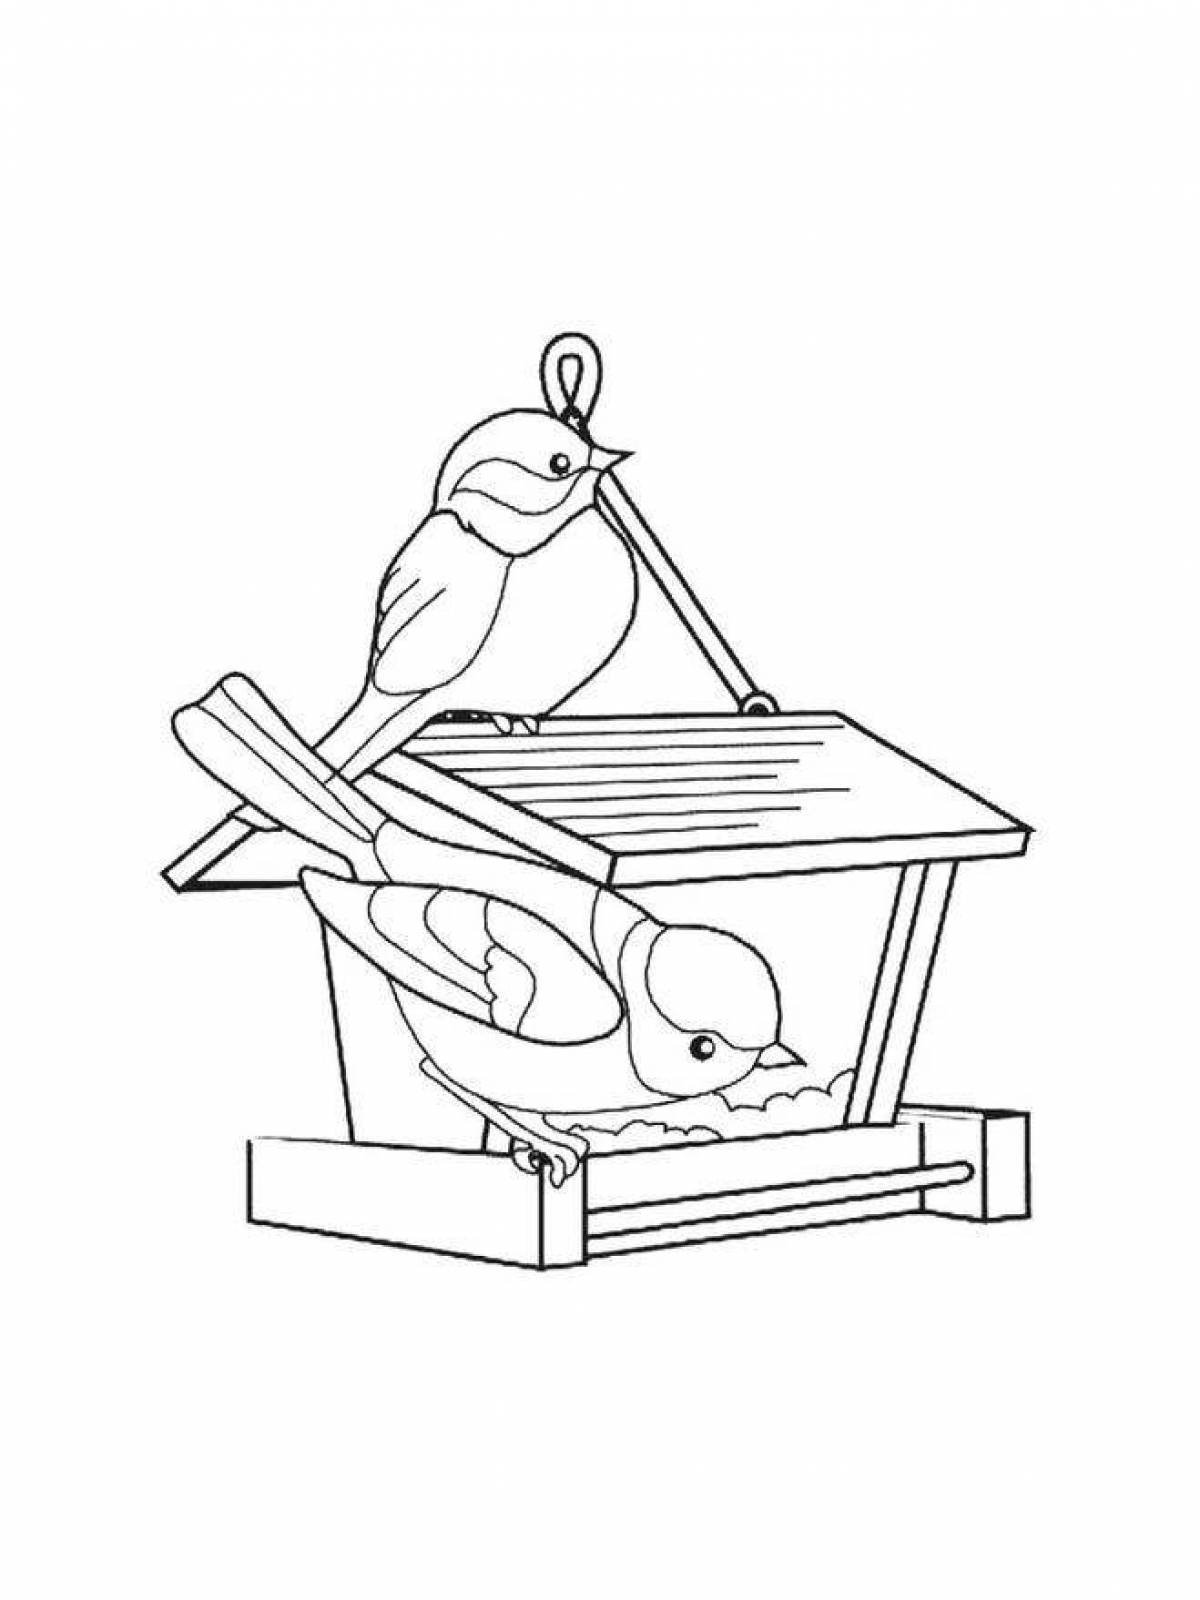 Coloring book colorful baby feeder